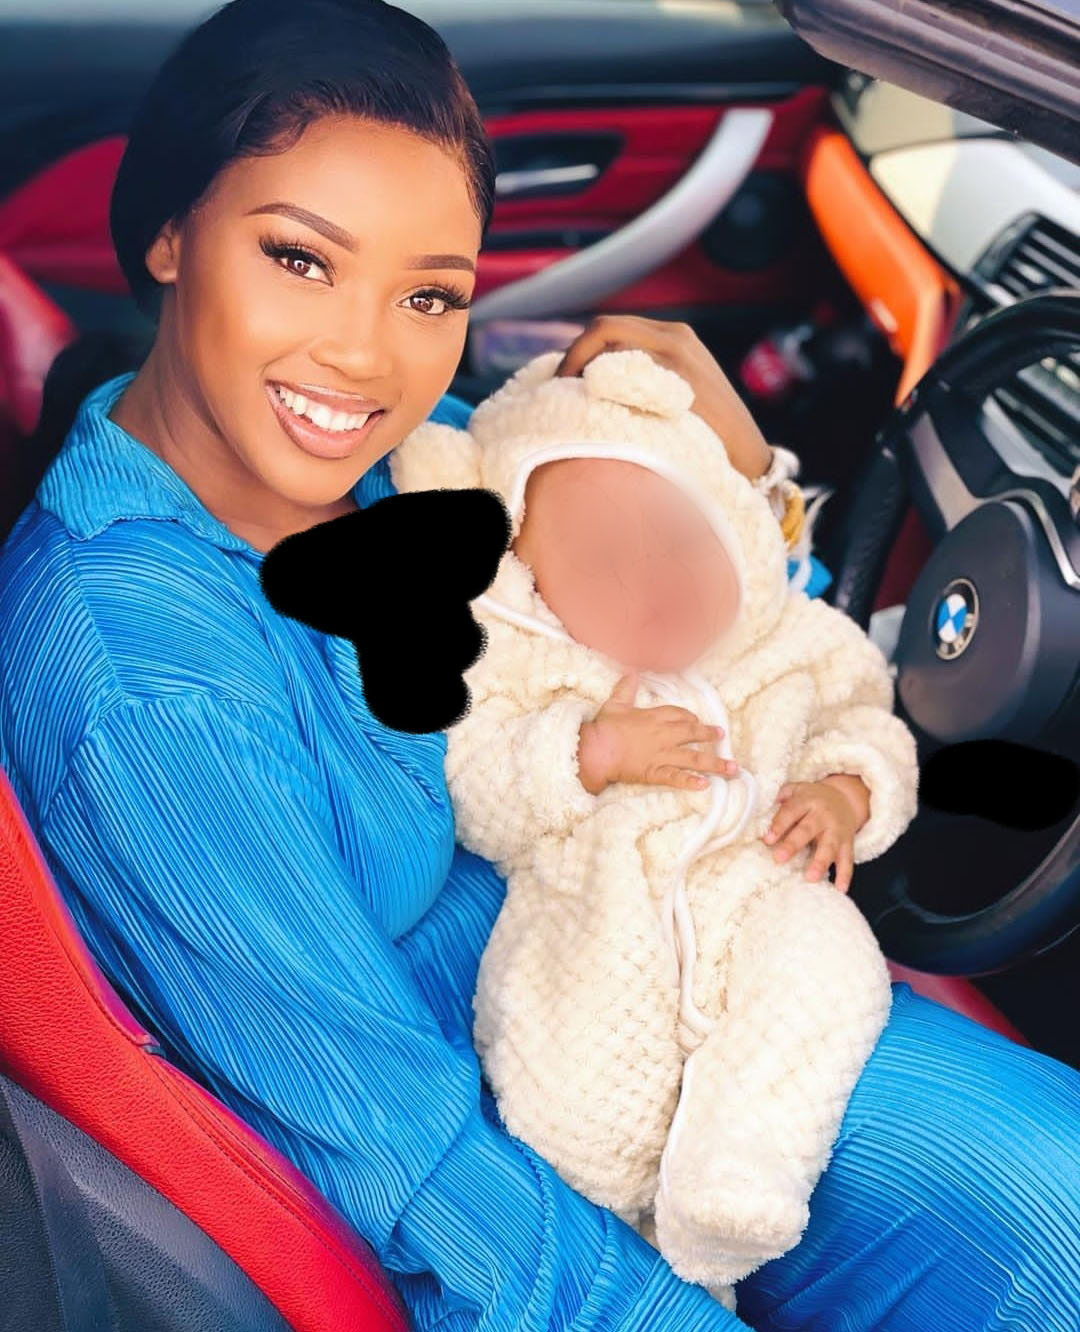 Durban Gen actress Faith Sibiya stunned Mzansi with a picture holding a baby "I miss my baby" 3